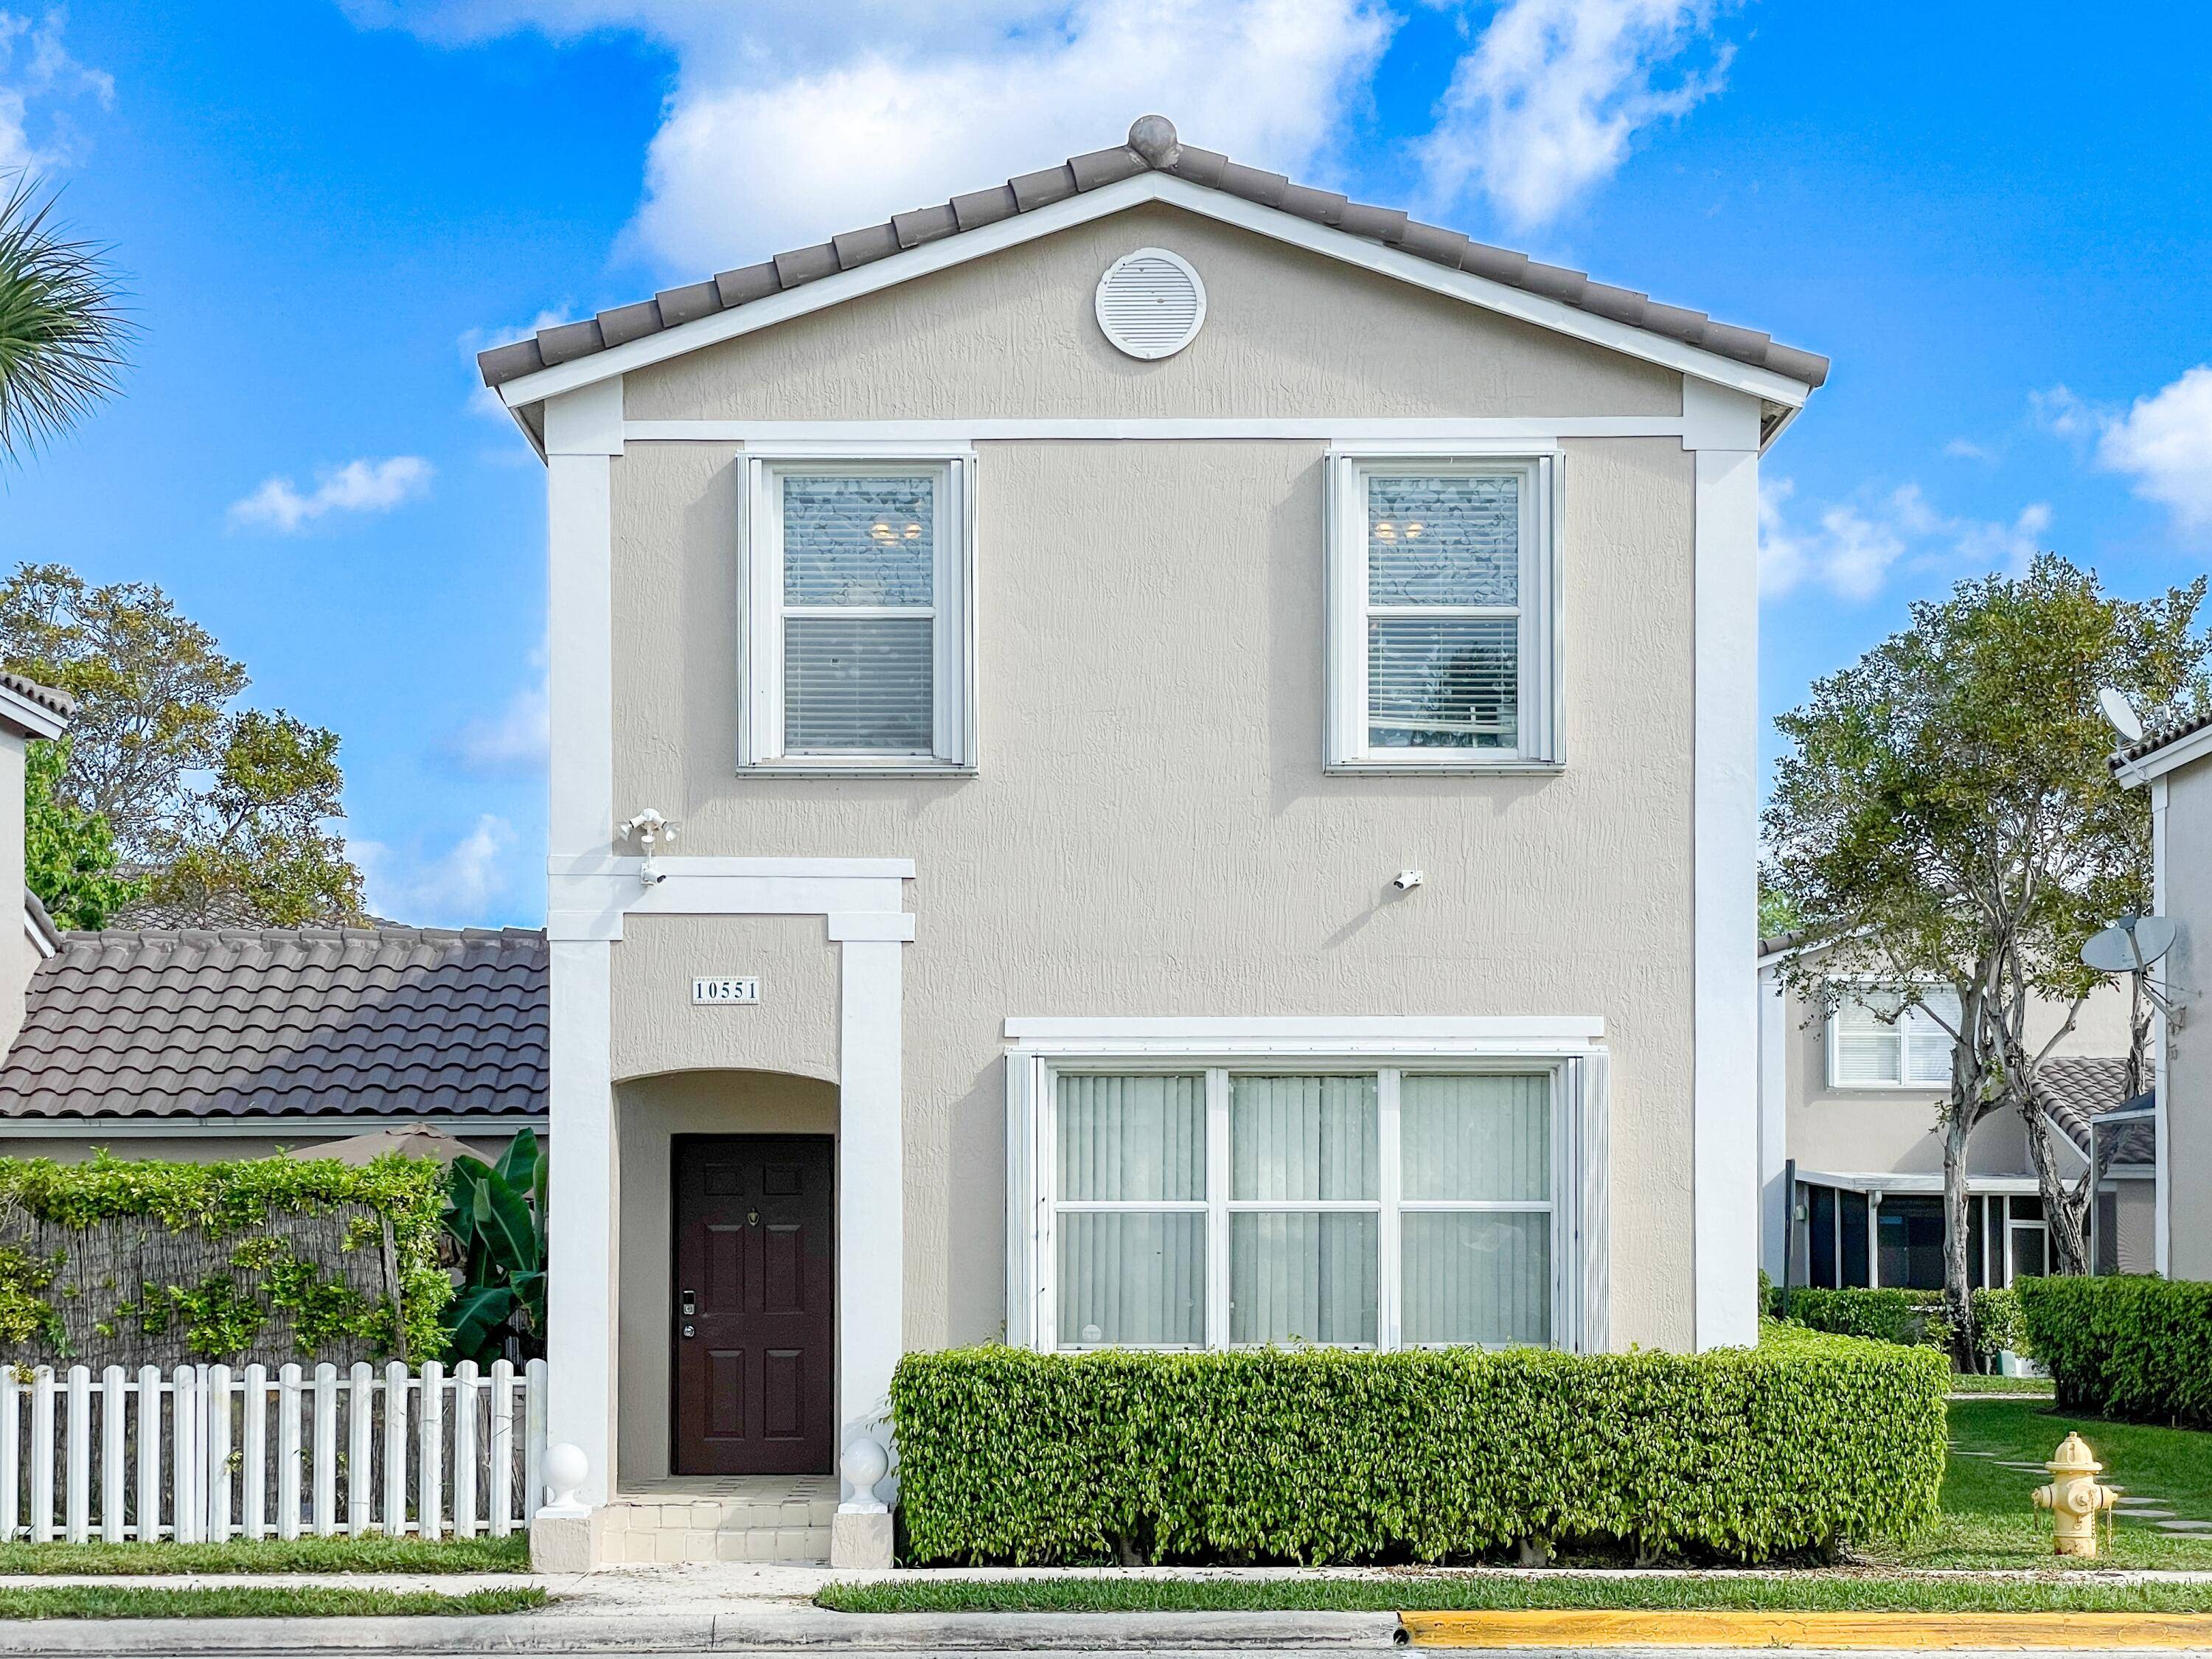 Welcome to your new home in the highly desirable north Coral Springs, ideally situated on the northwest corner of Coral Springs Drive and Westview Drive.